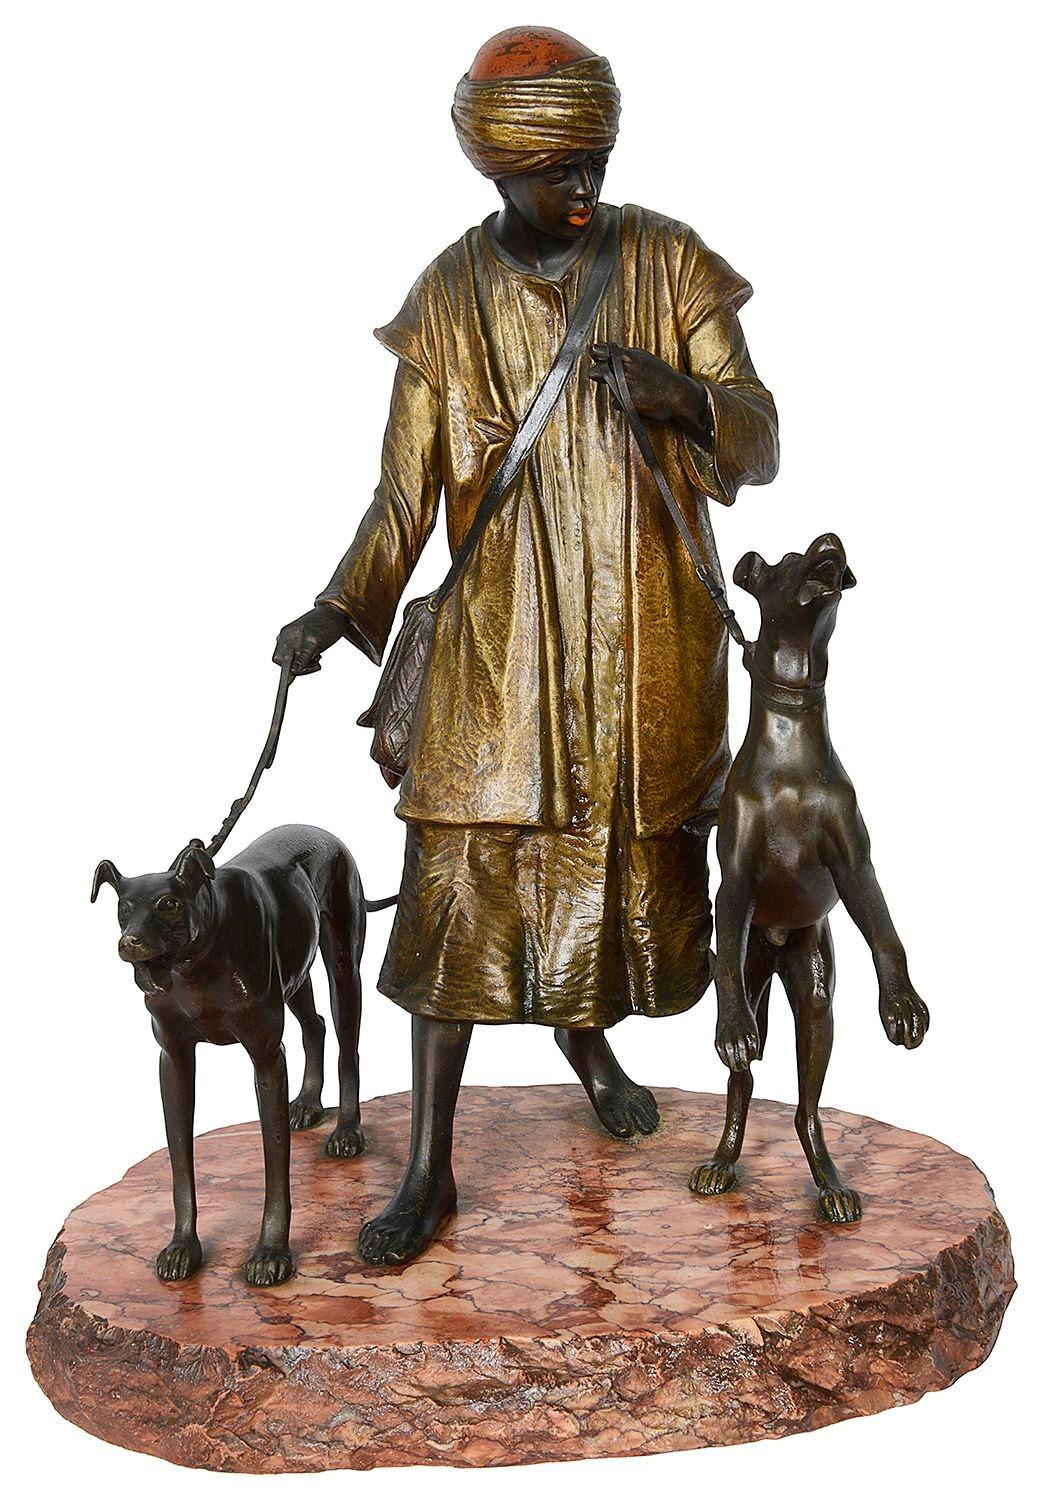 This wonderful quality late 19th Century cold painted bronze statue of an Arab, Houndsman, mounted on a Rouge marble base, in the manner of Franz Bergman.
Franz Xaver Bergman (or Bergmann) was a celebrated owner of a Viennese bronze foundry